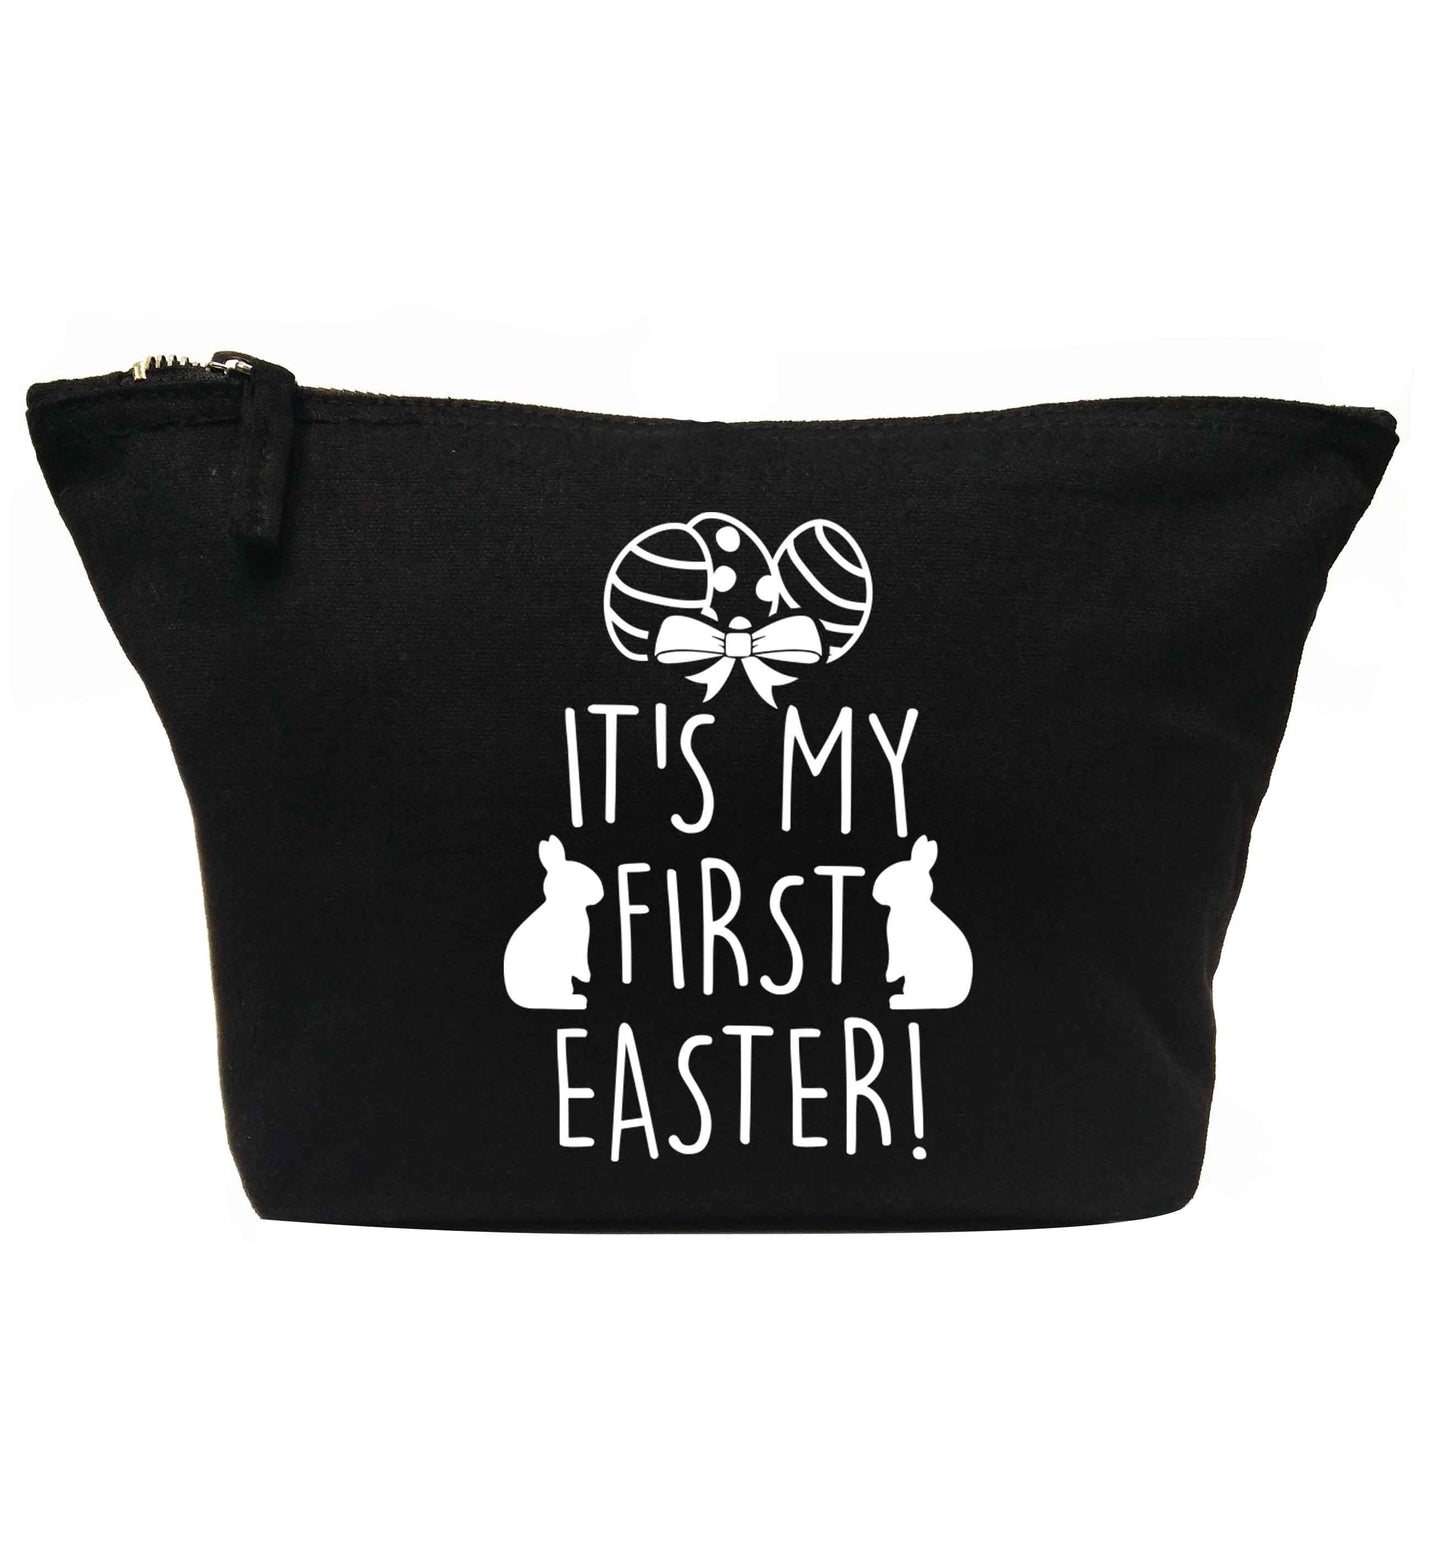 It's my first Easter | Makeup / wash bag